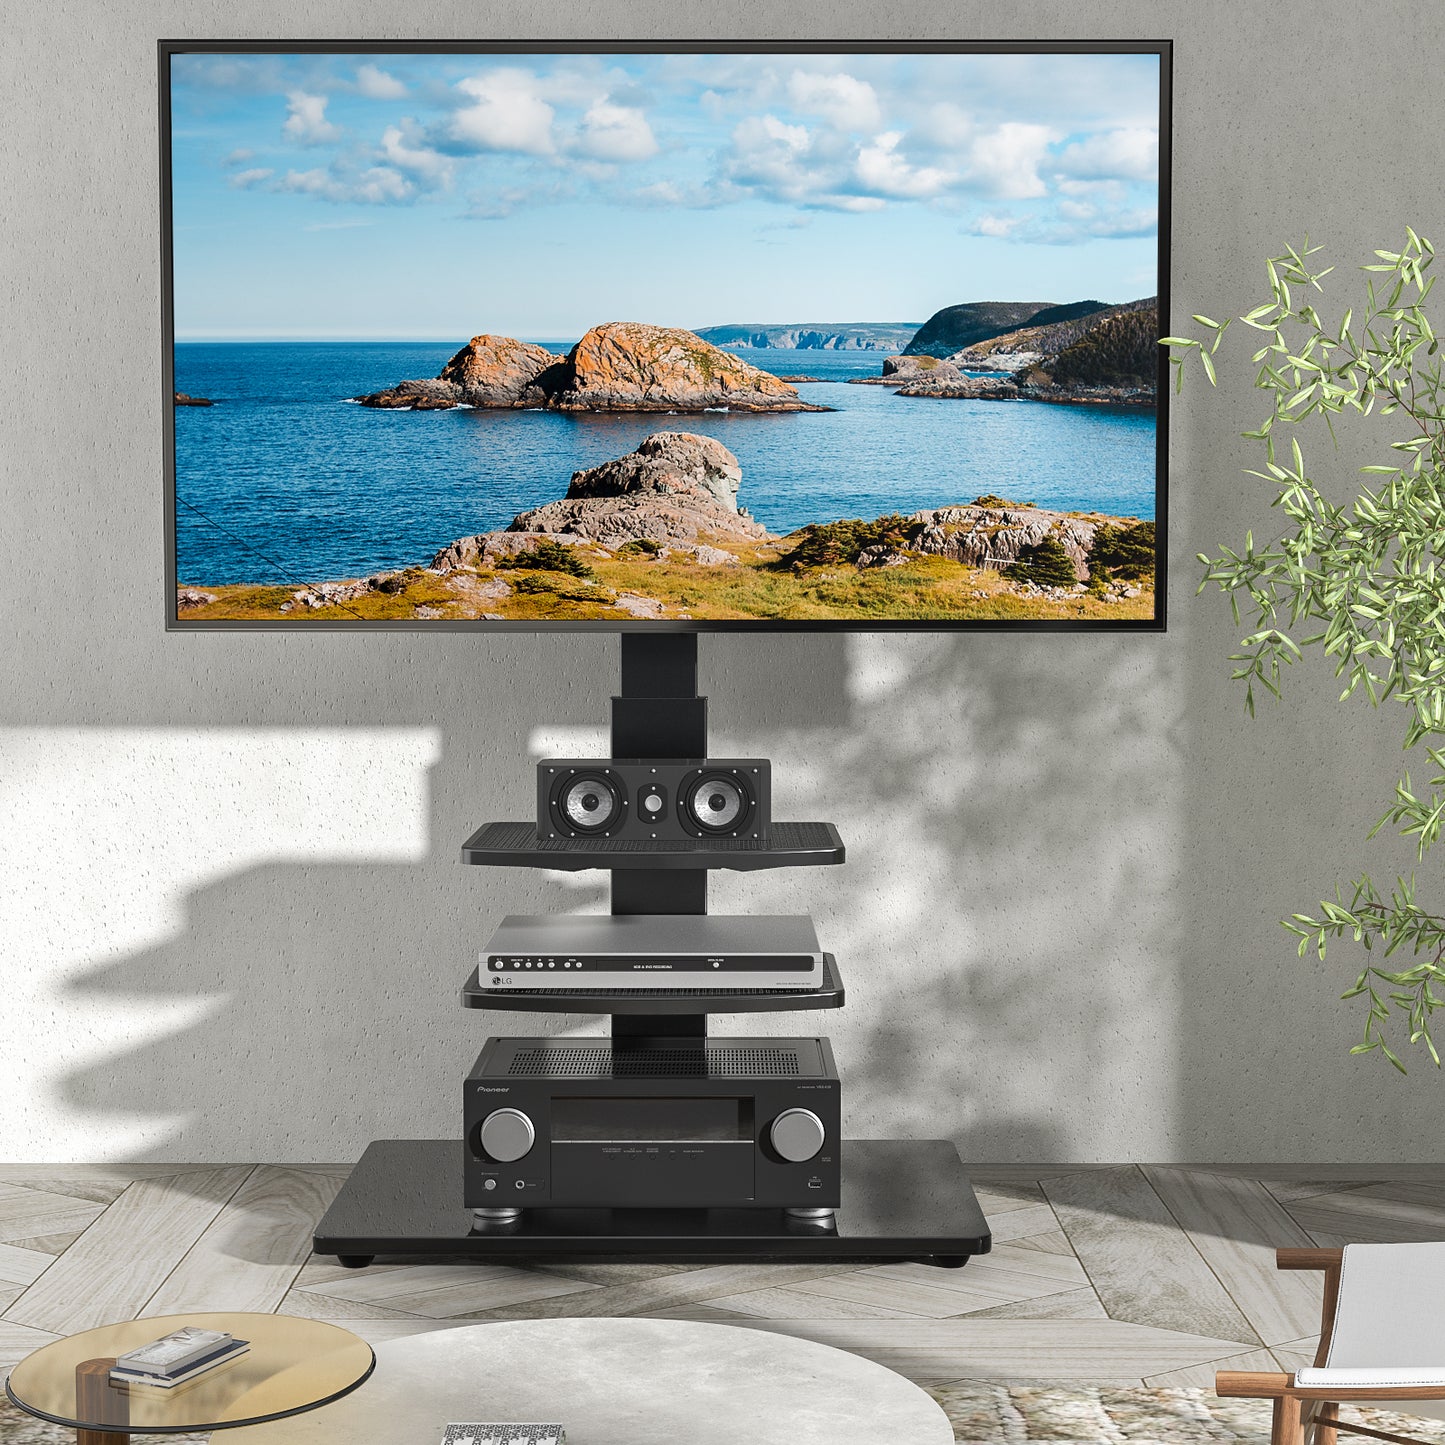 RFIVER Freestanding Swivel Floor TV Stand Tall TV Unit for 32 35 40 42 43 49 50 55 58 60 65 70 inch LCD/LED Flat Curved Screen Height Adjustable with 3-Tier Shelves Max VESA 400x400mm up to 50kgs